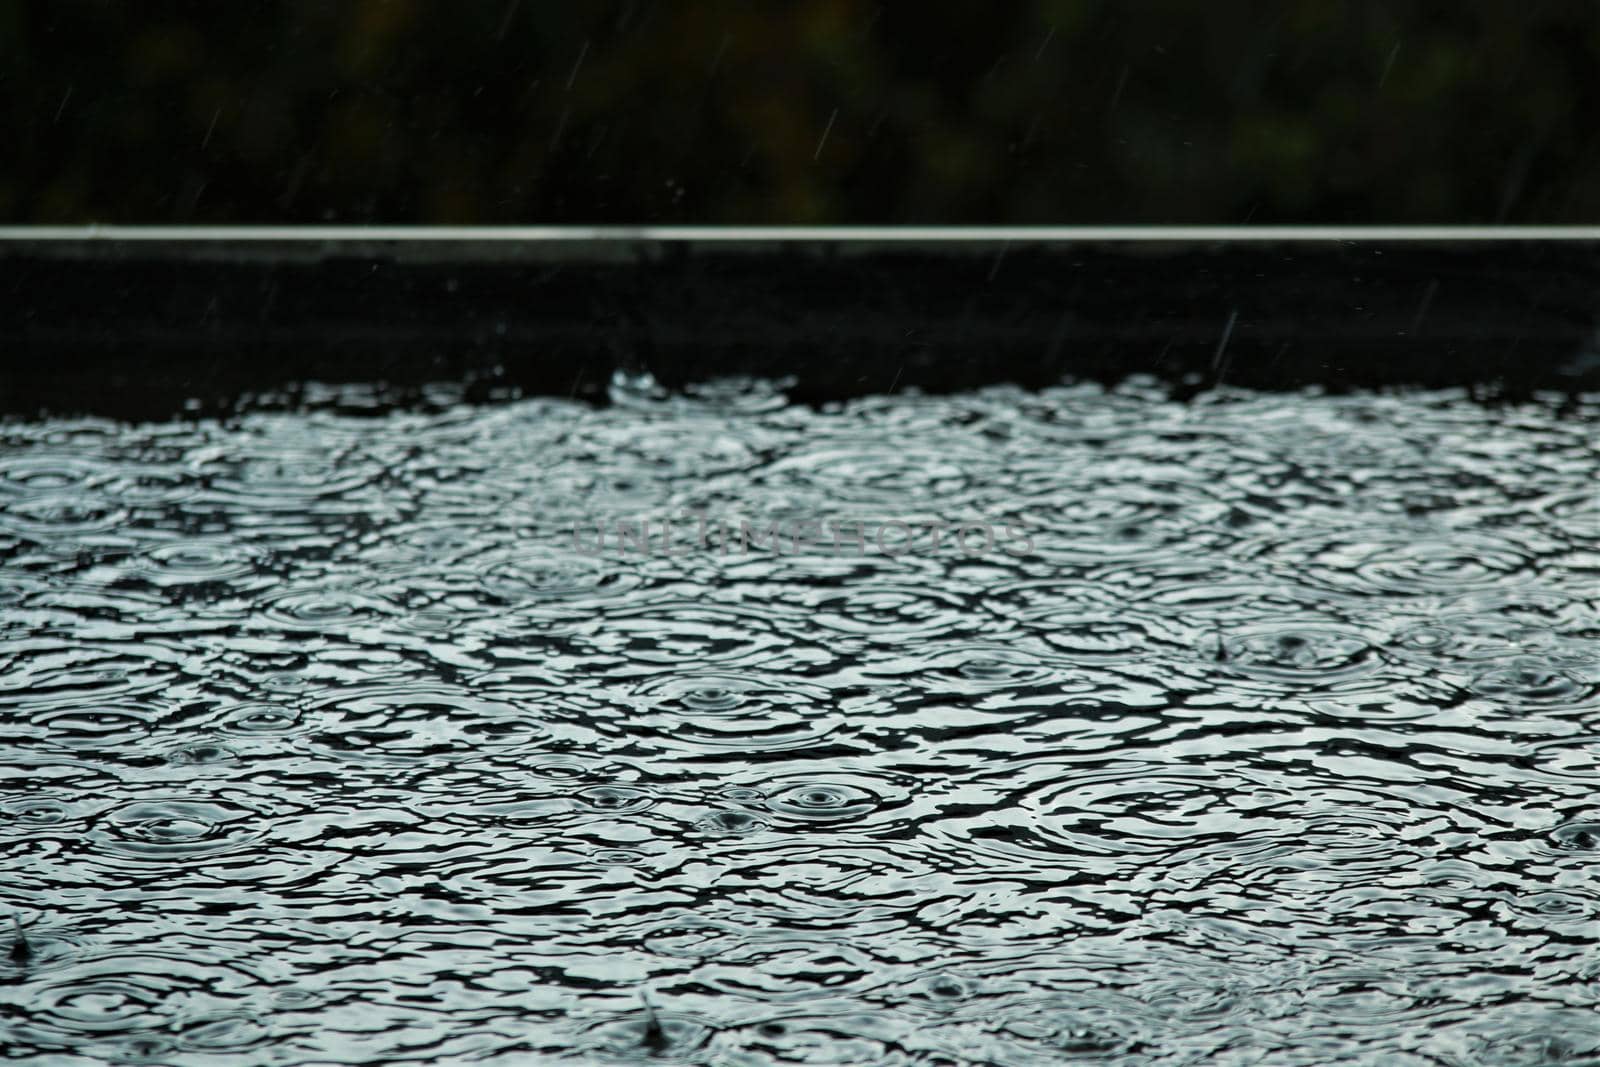 Rain makes circles on a black flat roof by Luise123